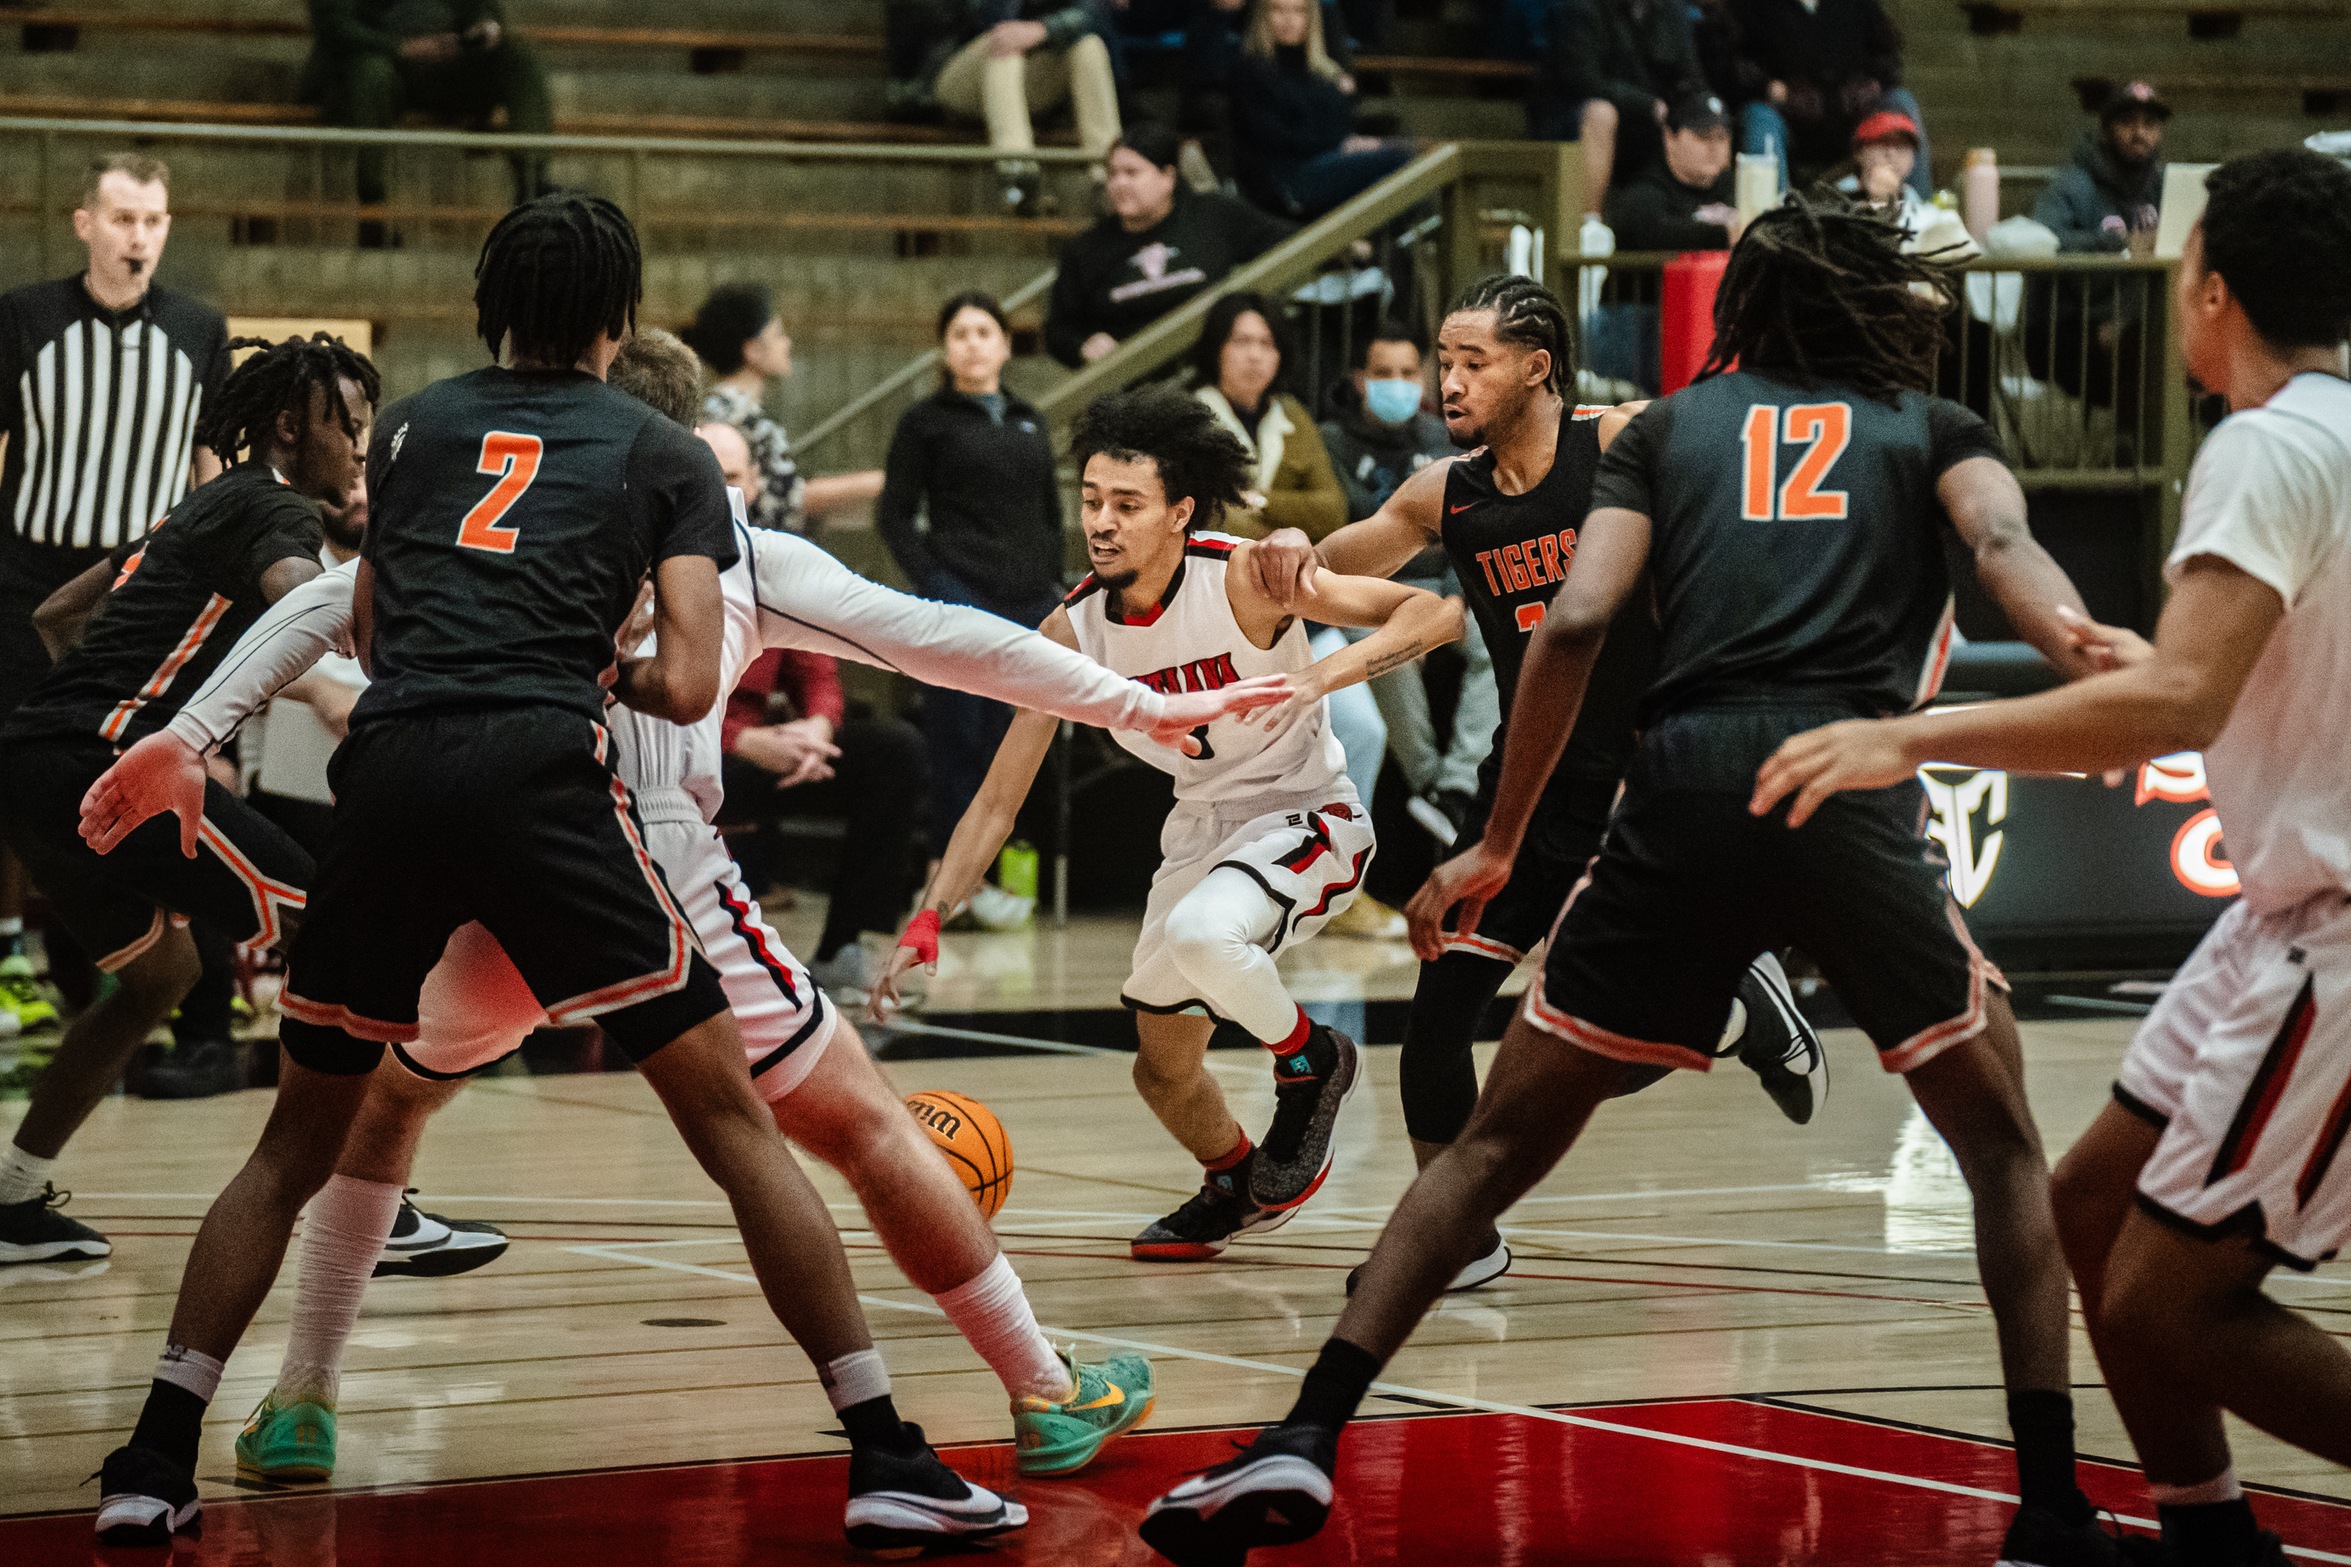 Dons Fall Short of Last Minute Comeback, Fall to RCC 70-68